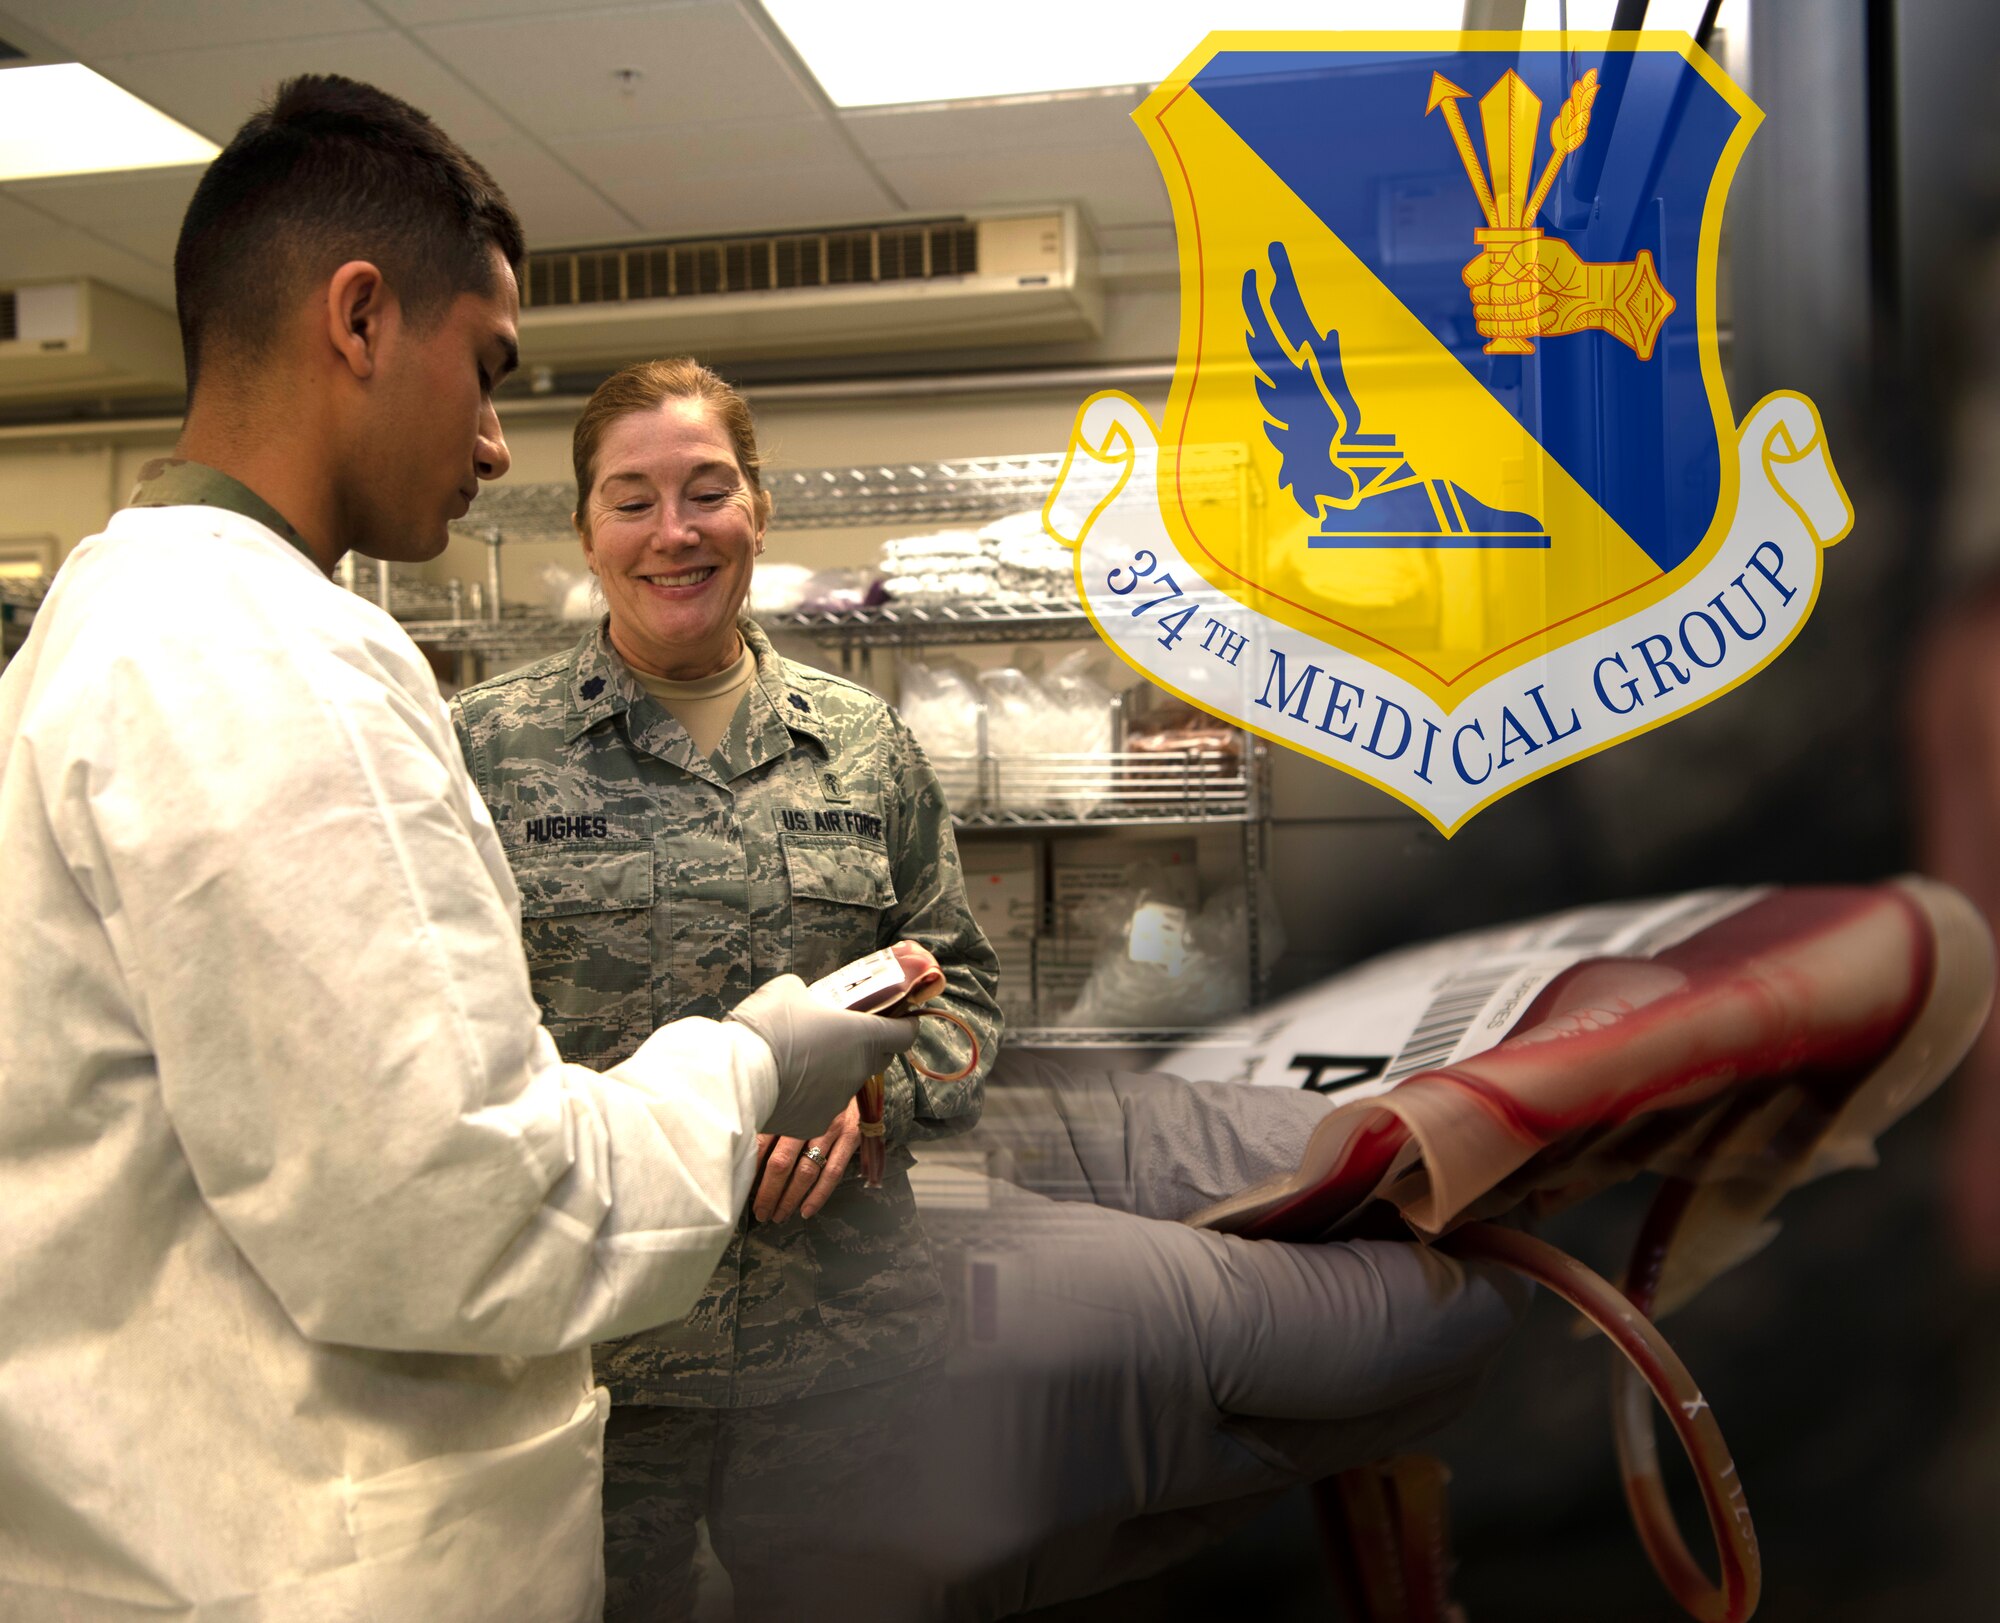 Lt. Col. Jessica Hughes, Air Force Blood Program officer, teaches Airman 1st Class Julian Manon, 374th Medical Support Squadron medical laboratory apprentice, how to read the full label on a unit of blood at Yokota Air Base, Japan, Jan. 24, 2020, in preparation for an upcoming inspection. The Transfusion Services department of the 374th Medical Group must adhere to all Food and Drug Administration quality standards. (U.S. Air Force photo illustration by Staff Sgt. Taylor A. Workman)